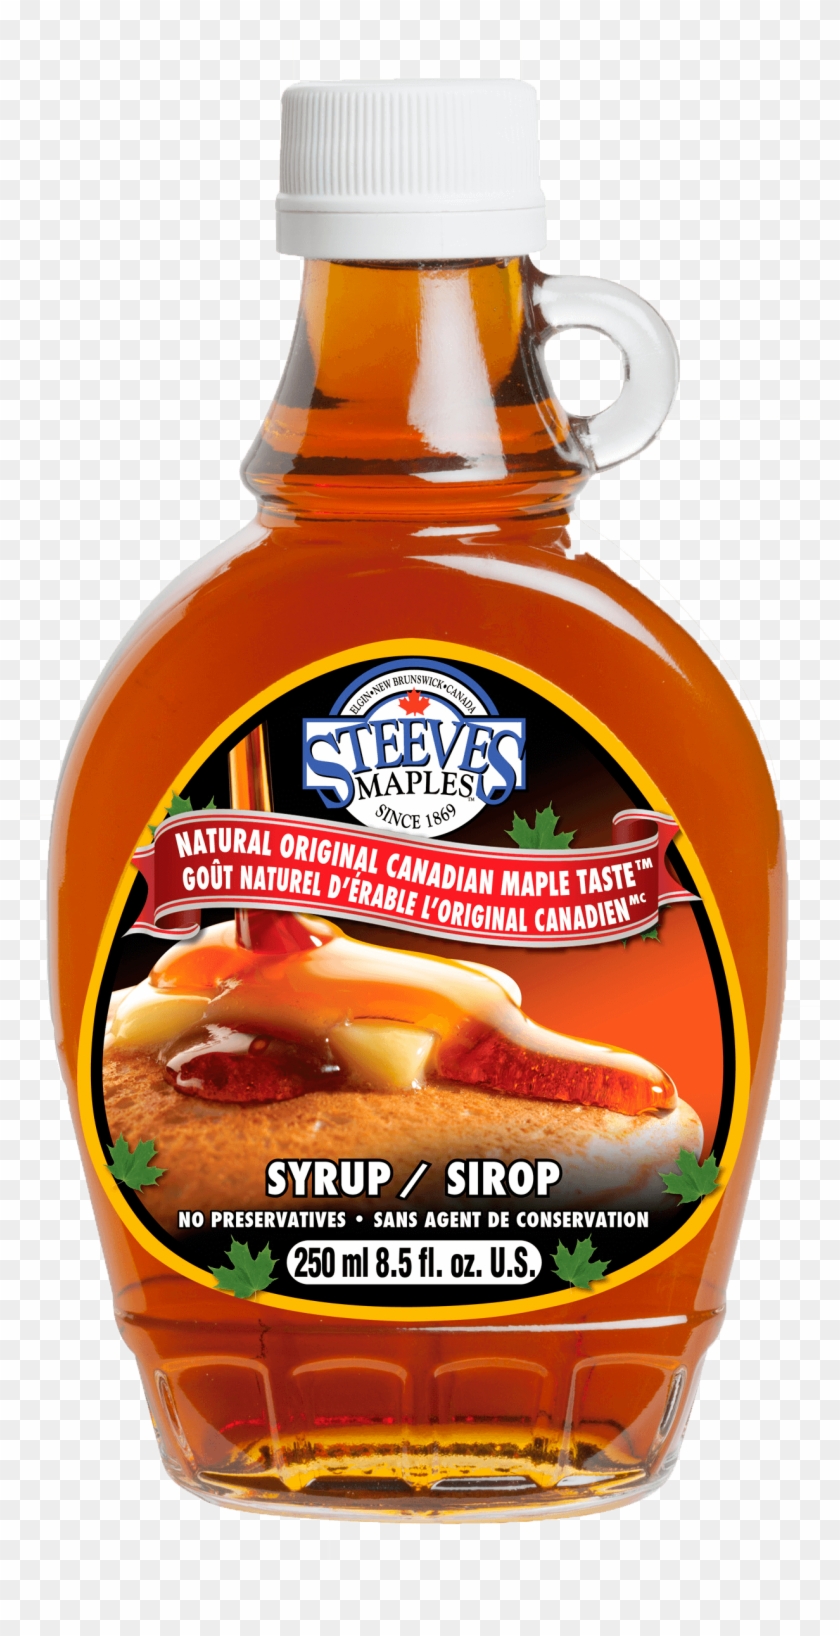 Of Maple Flavoured Products - Maple Syrup Companies In Canada Clipart